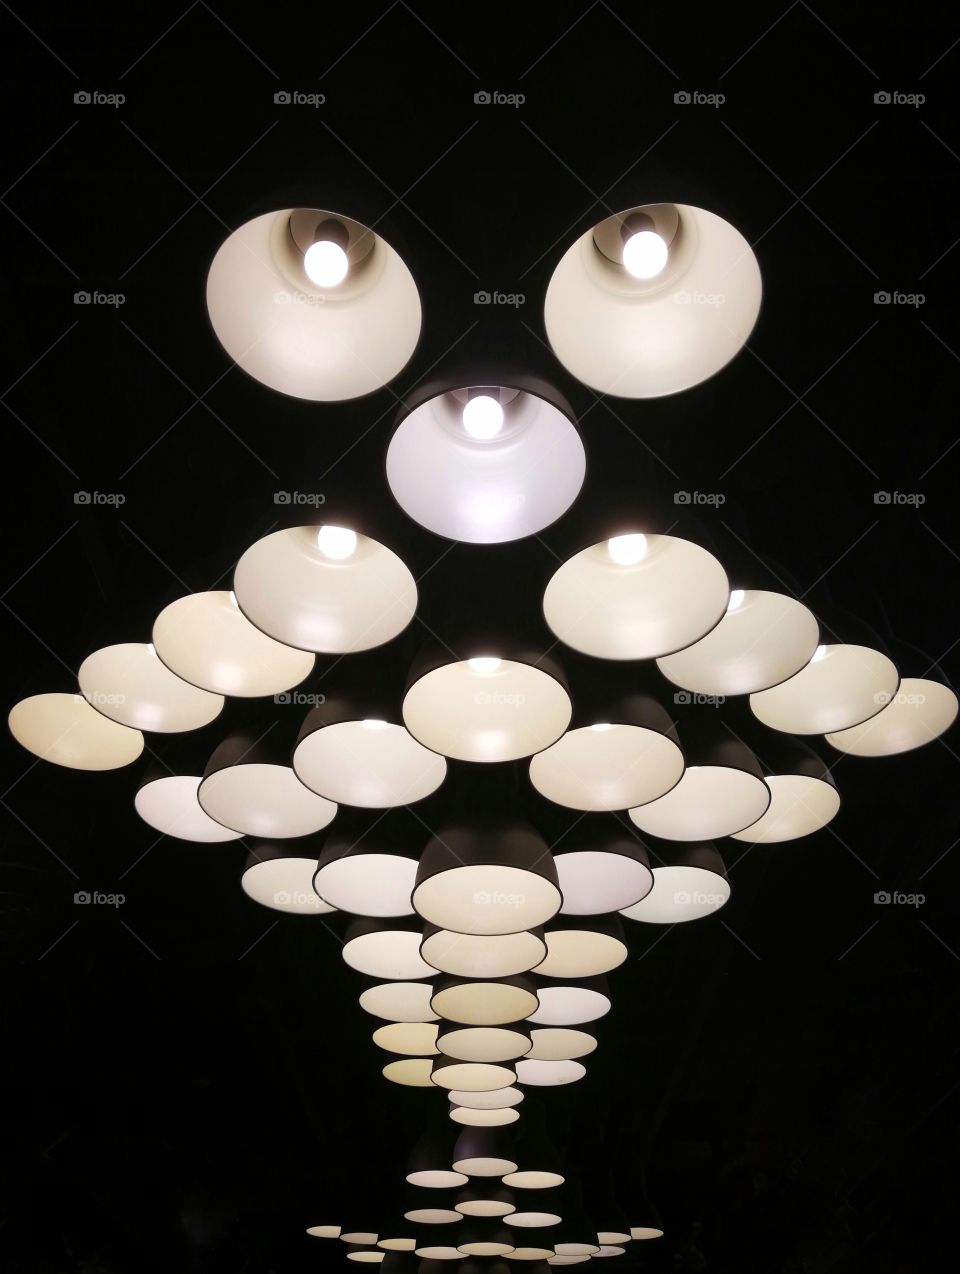 Unique pattern of group of minimalistic lighting fixtures with black background